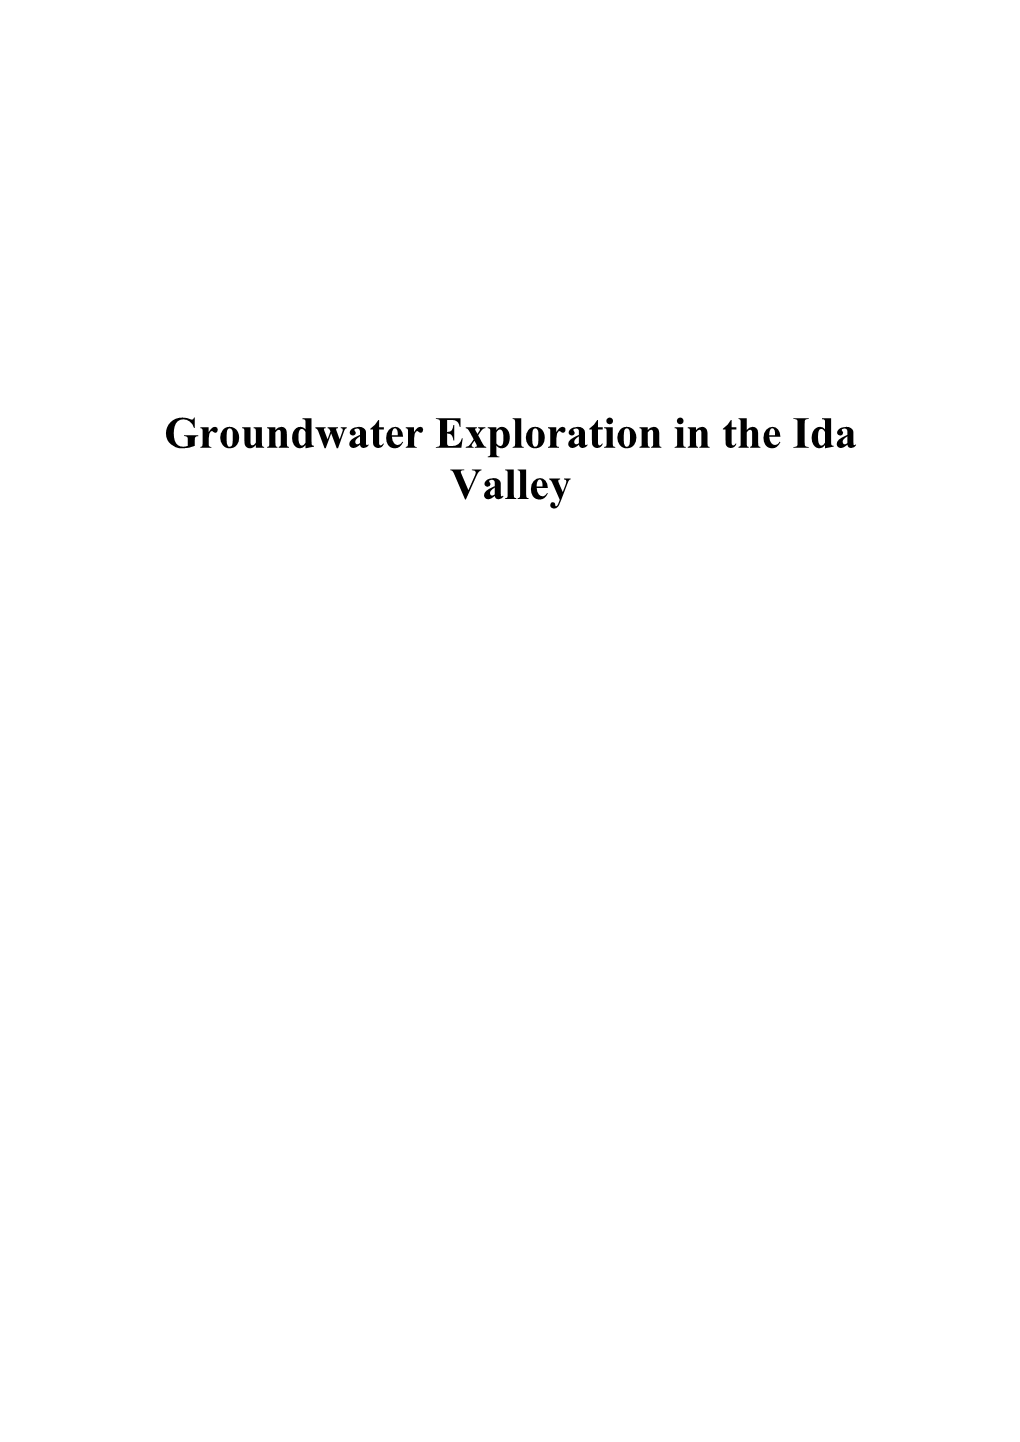 Groundwater Exploration in the Ida Valley